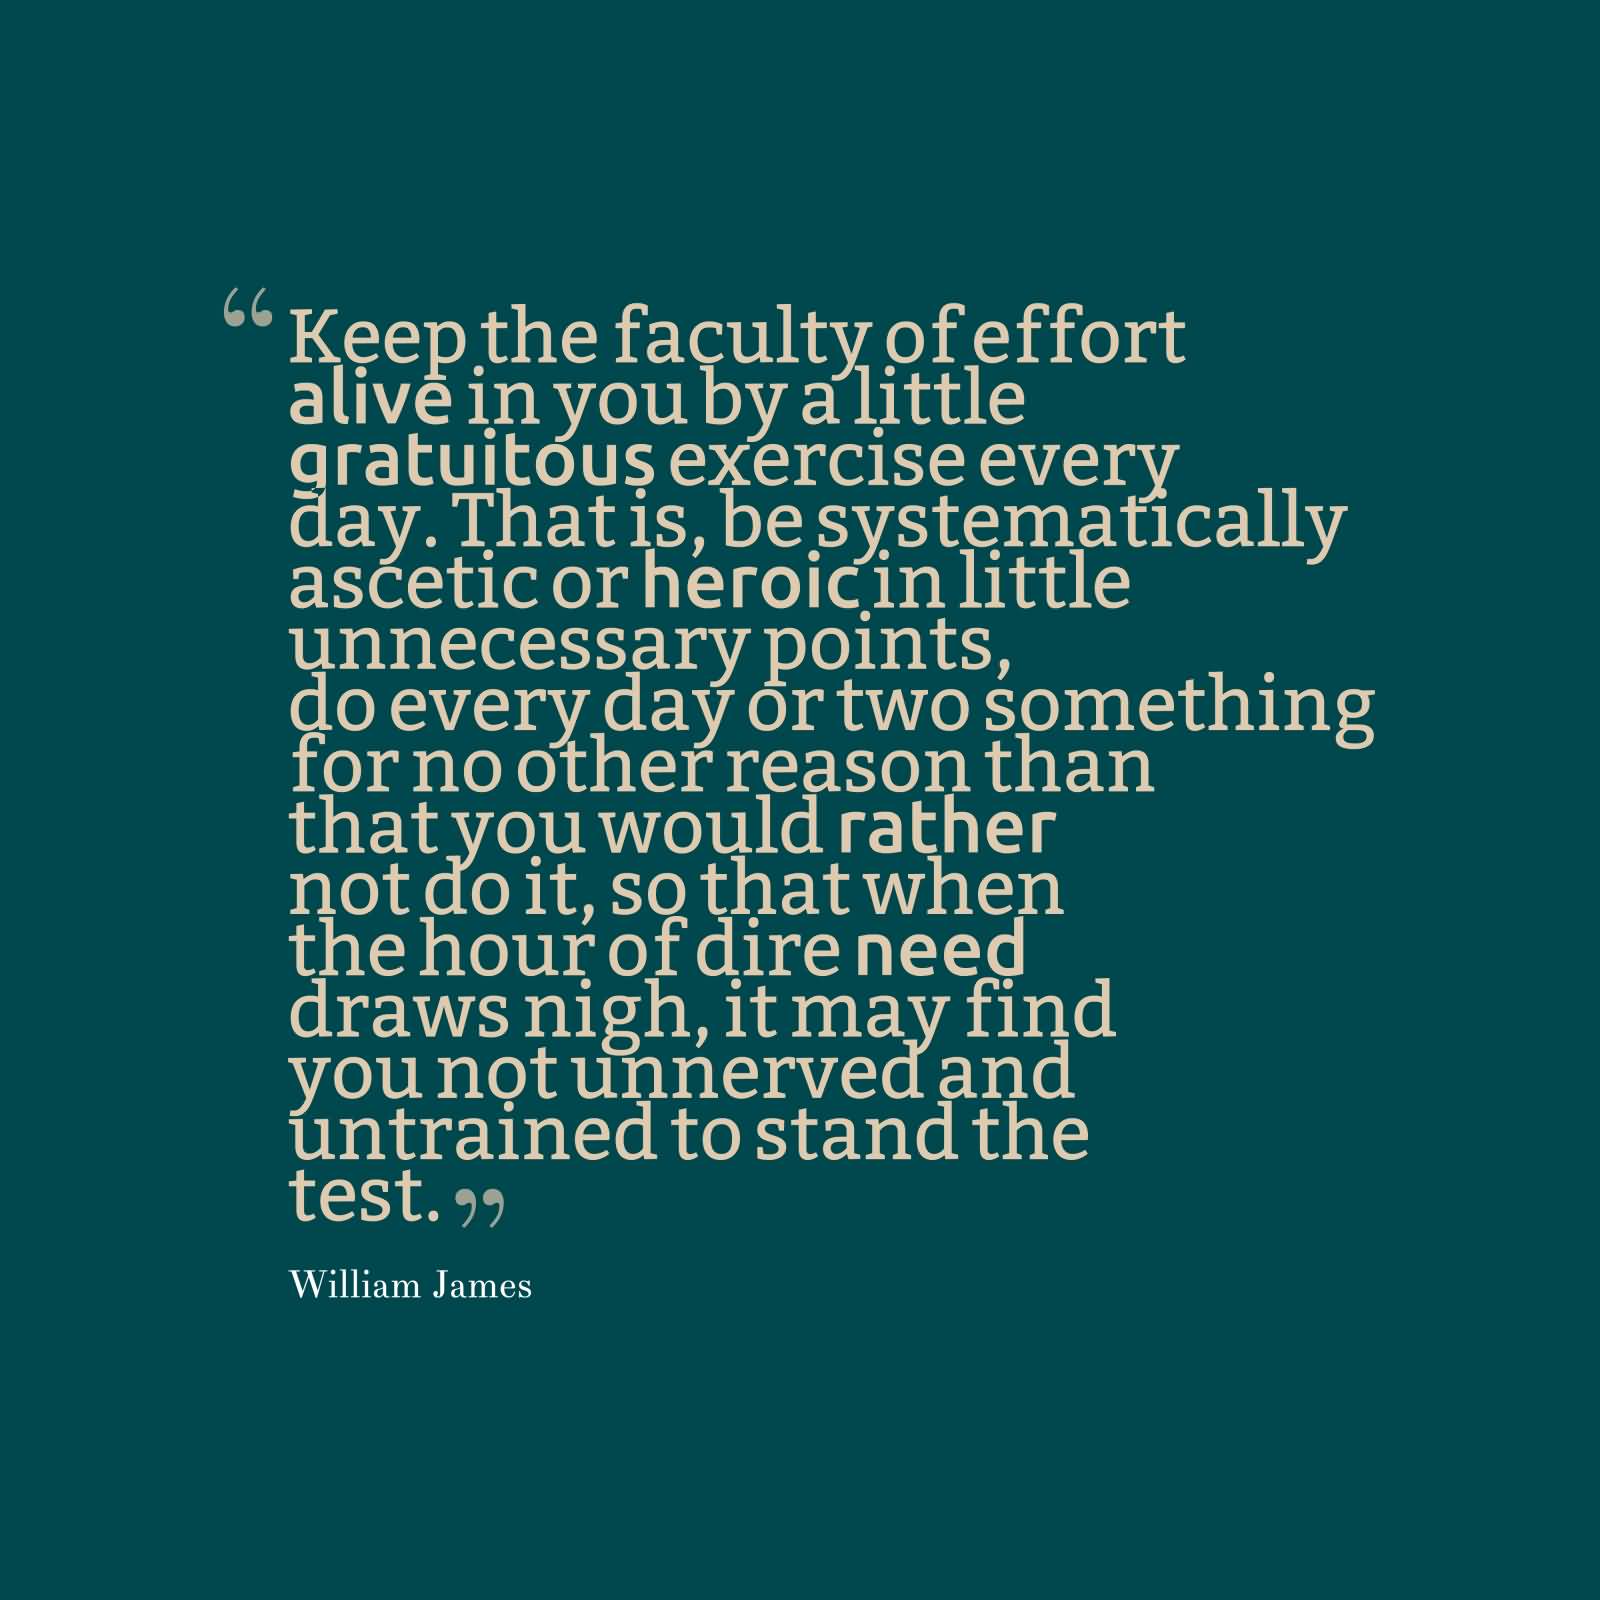 Keep the faculty of effort alive in you by a little gratuitous exercise every day. That is, be systematically ascetic or heroic in little unnecessary points, do every day or two something for no other reason than that you would rather not do it, so that when the hour of dire need draws nigh, it may find you not unnerved and untrained to stand the test.